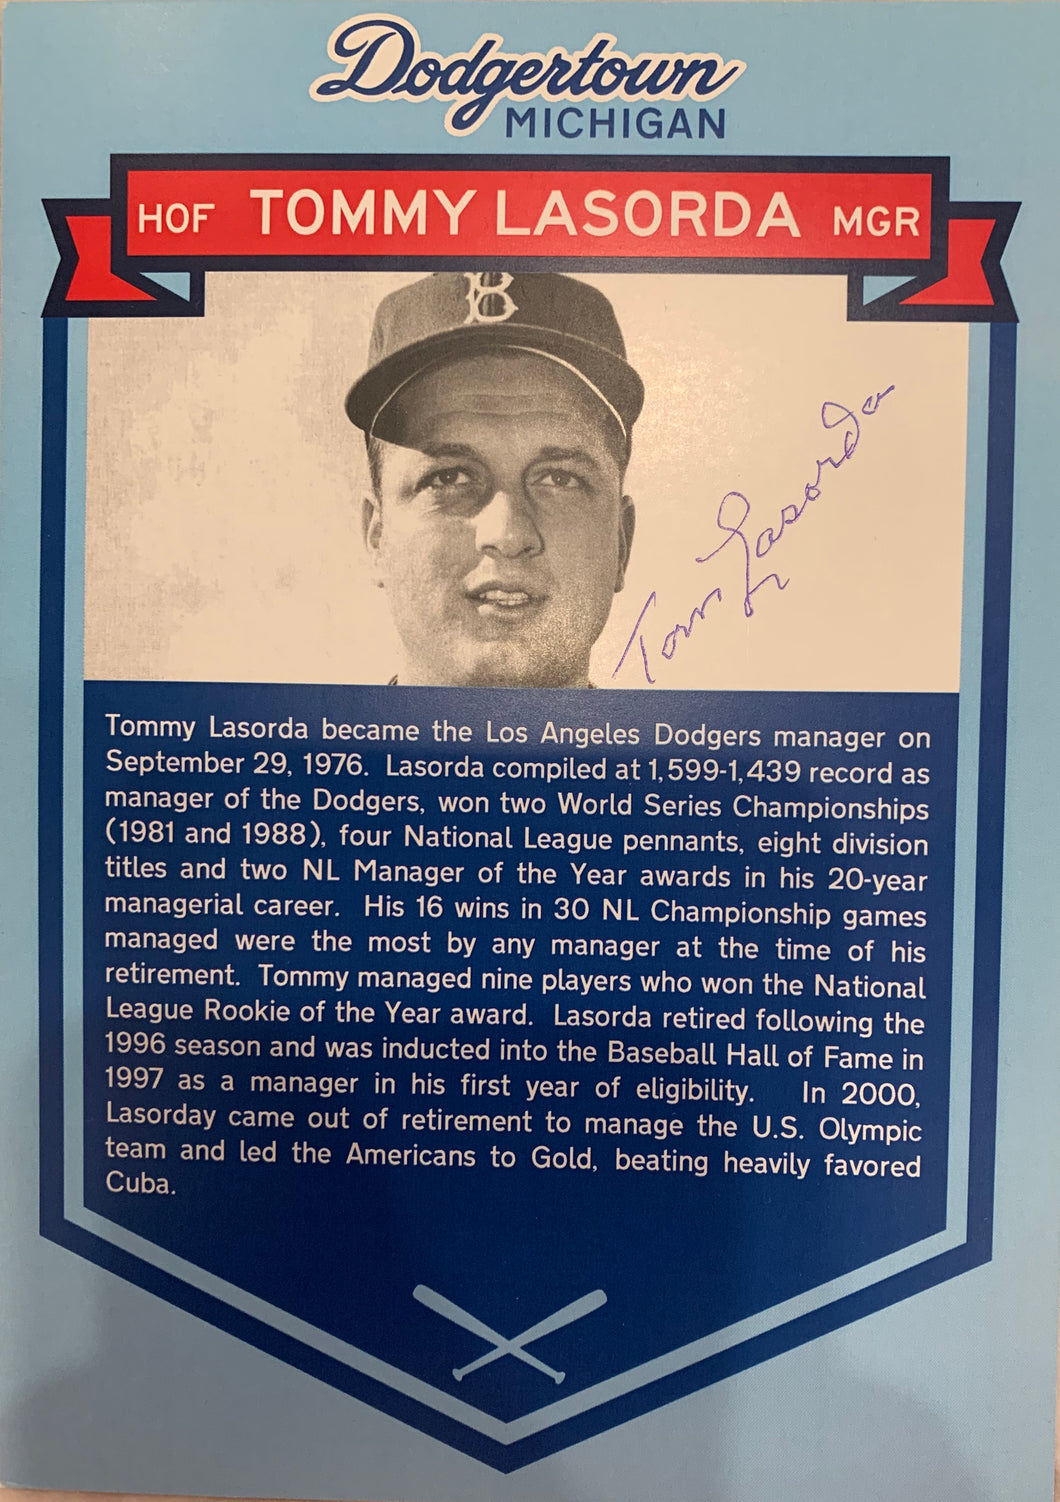 Tommy Lasorda Autographed Dodgertown Card